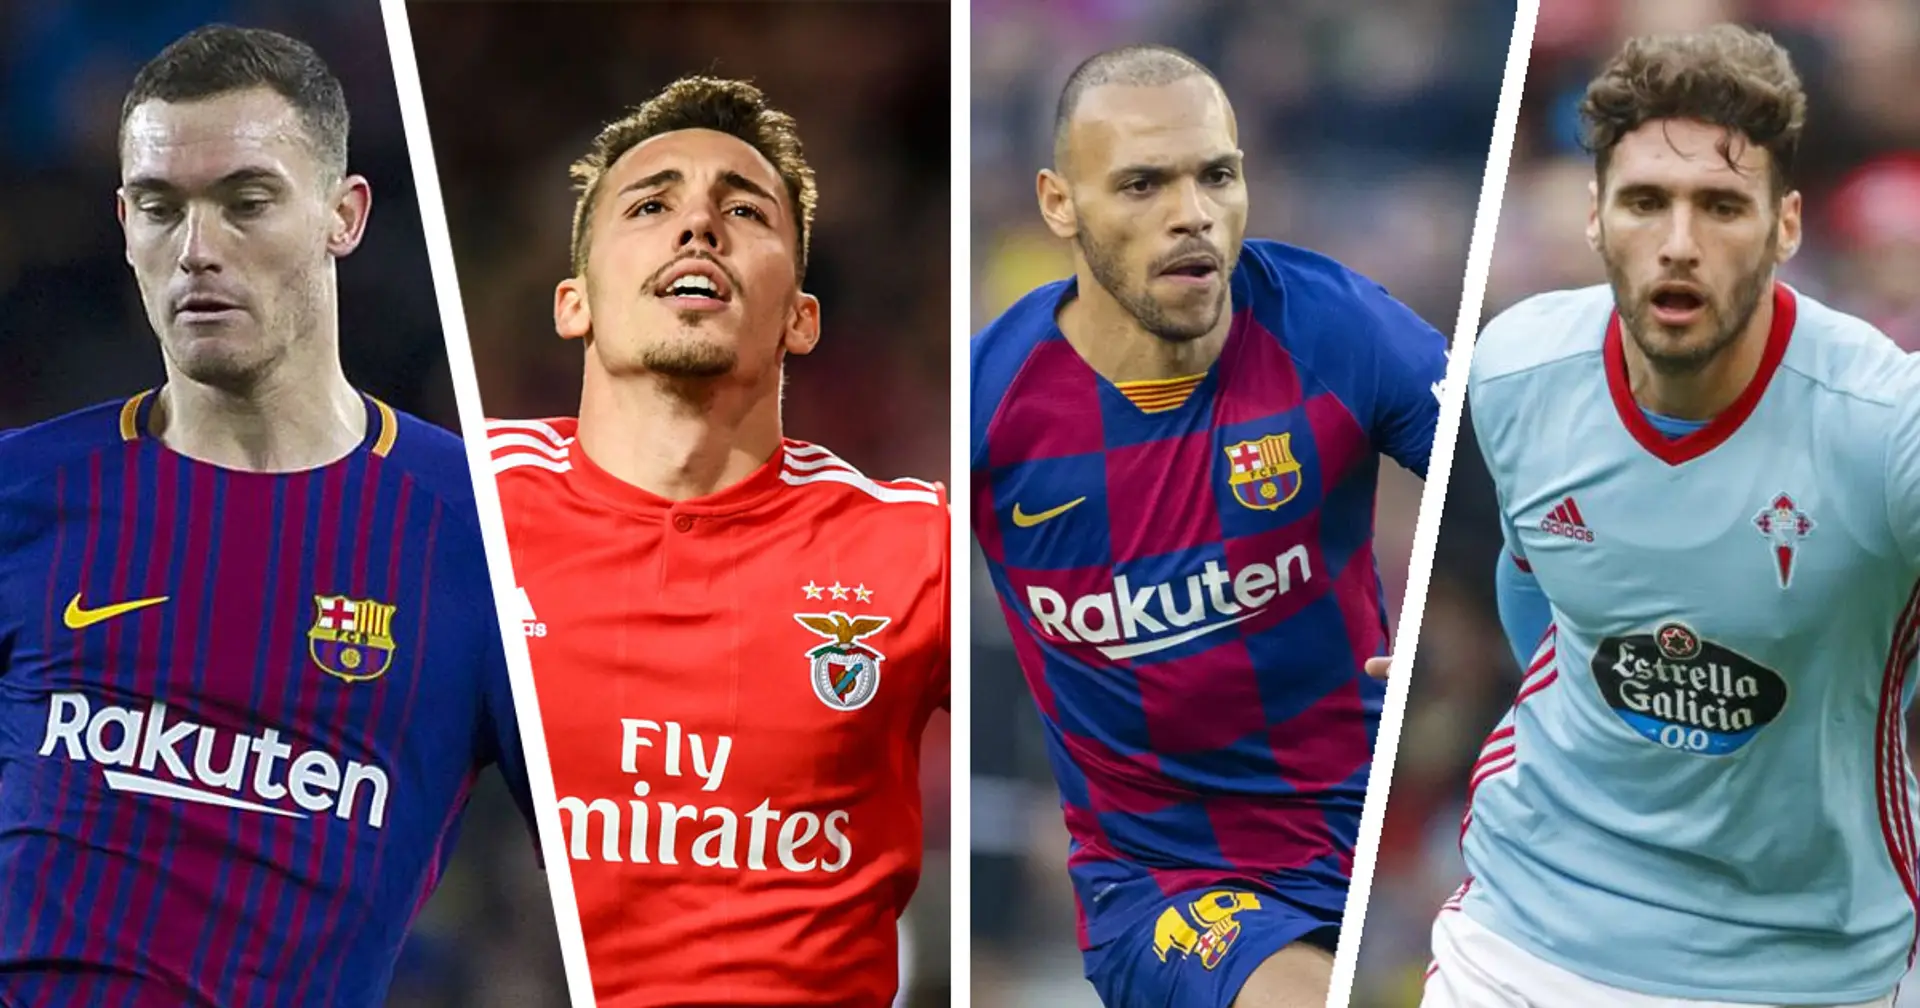 Barca wasted €220m by not trusting La Masia products like Grimaldo, Samper and others